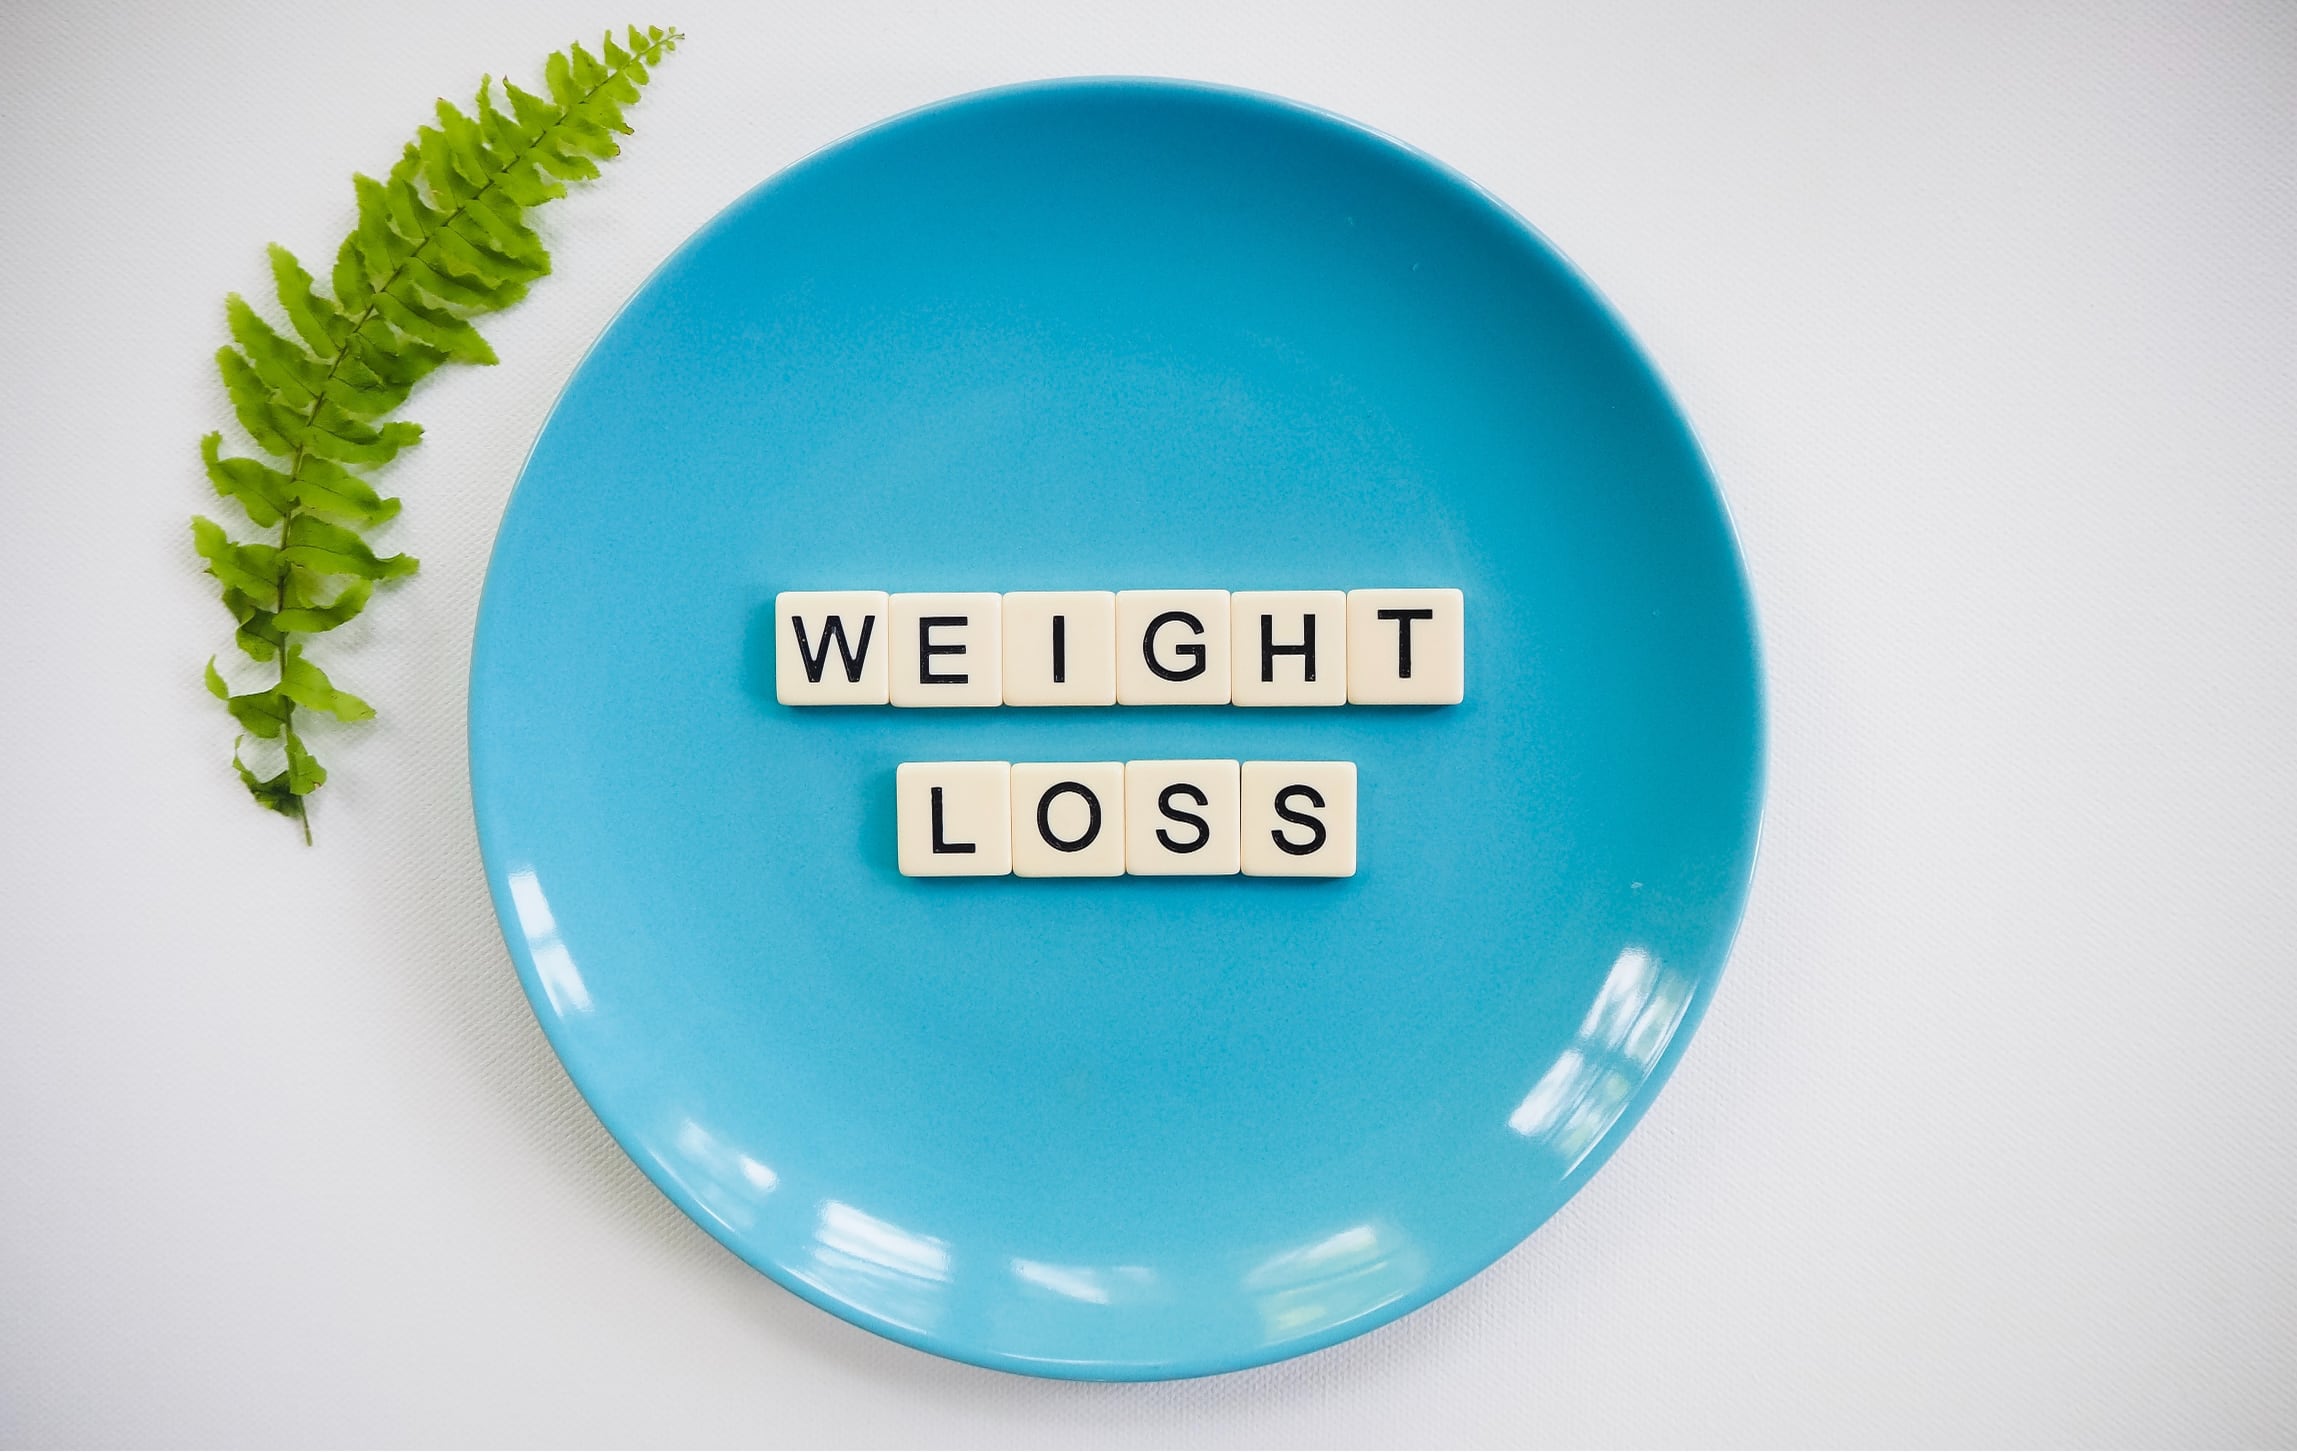 Scrabble letters on a plate, spelling weight loss